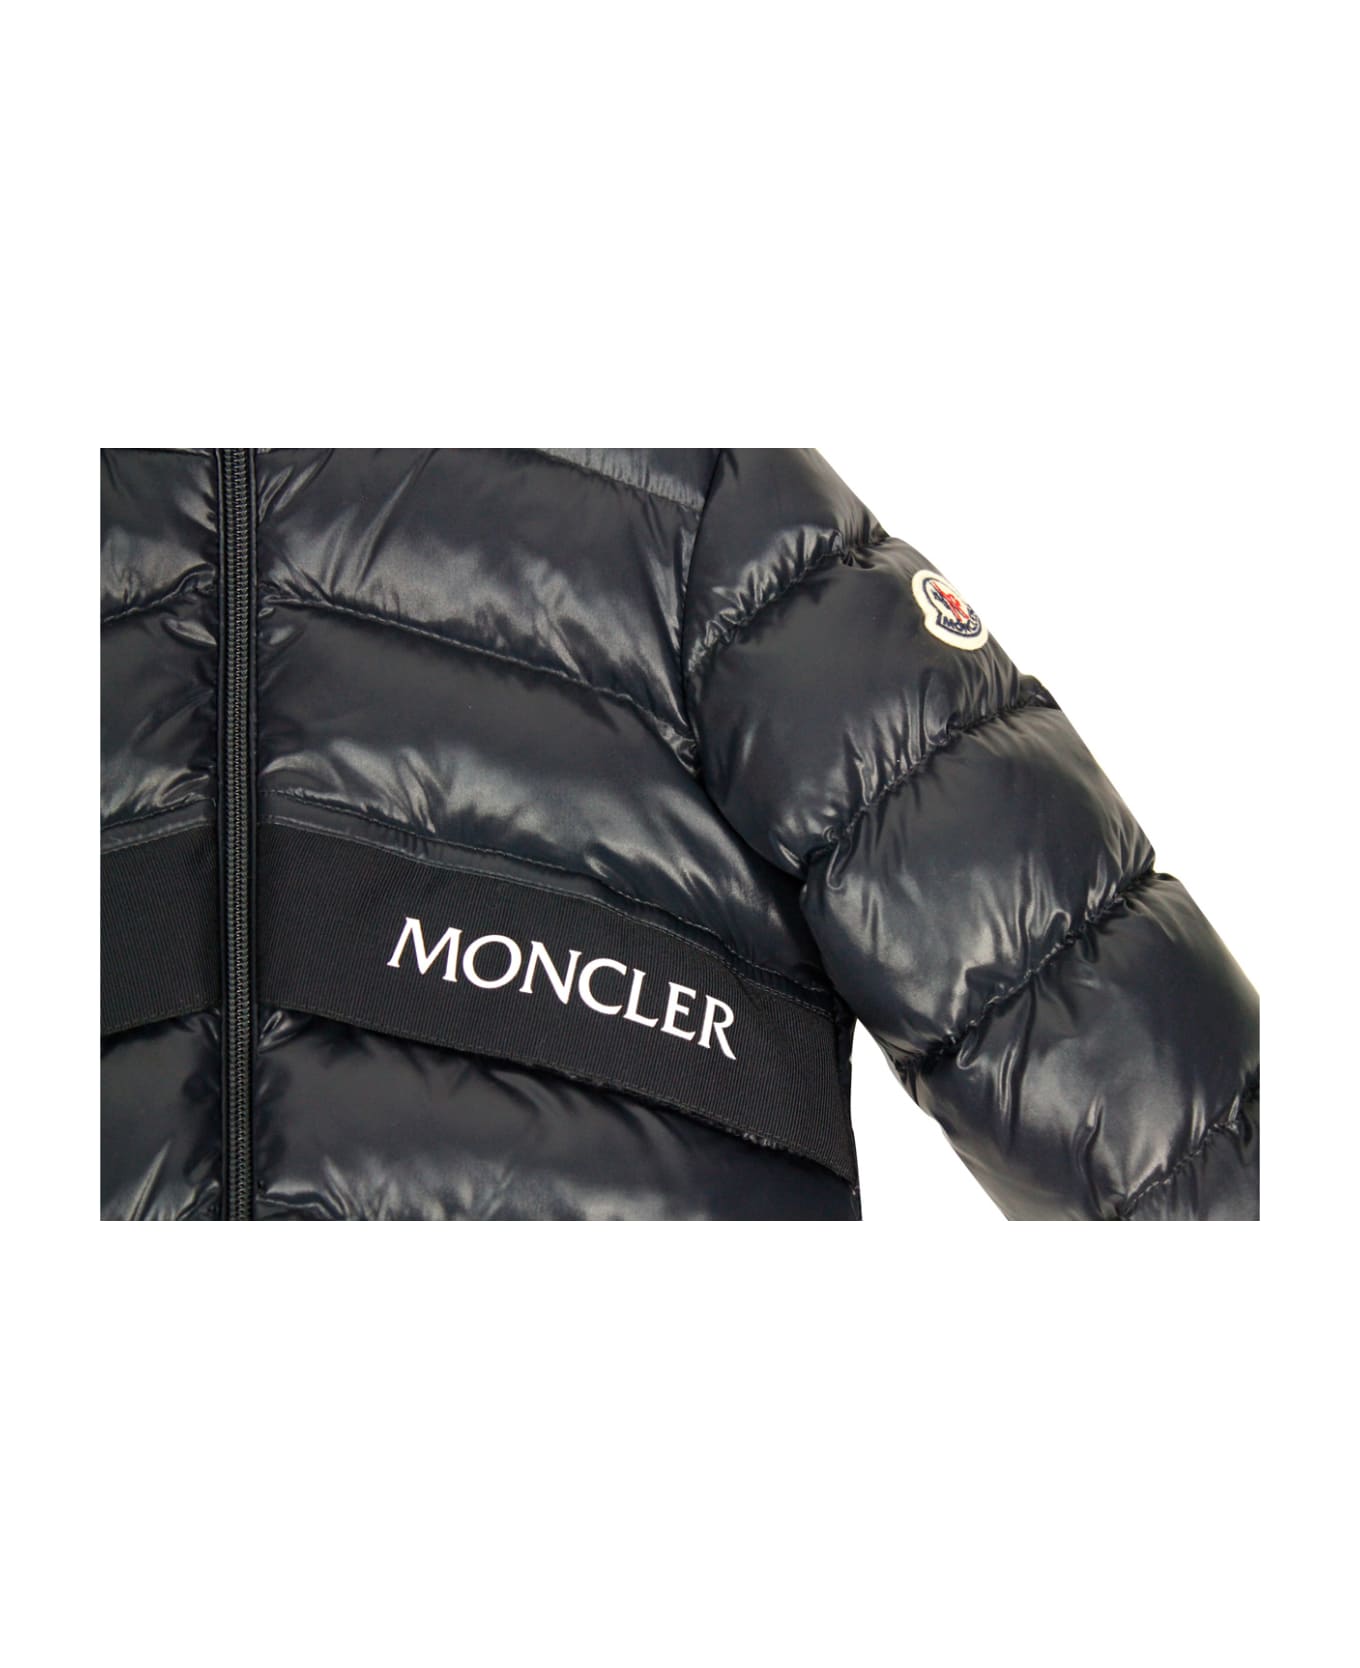 Moncler Complete Ski Suit Consisting Of Dungarees And Real Goose Down Jacket With Hood - Blu